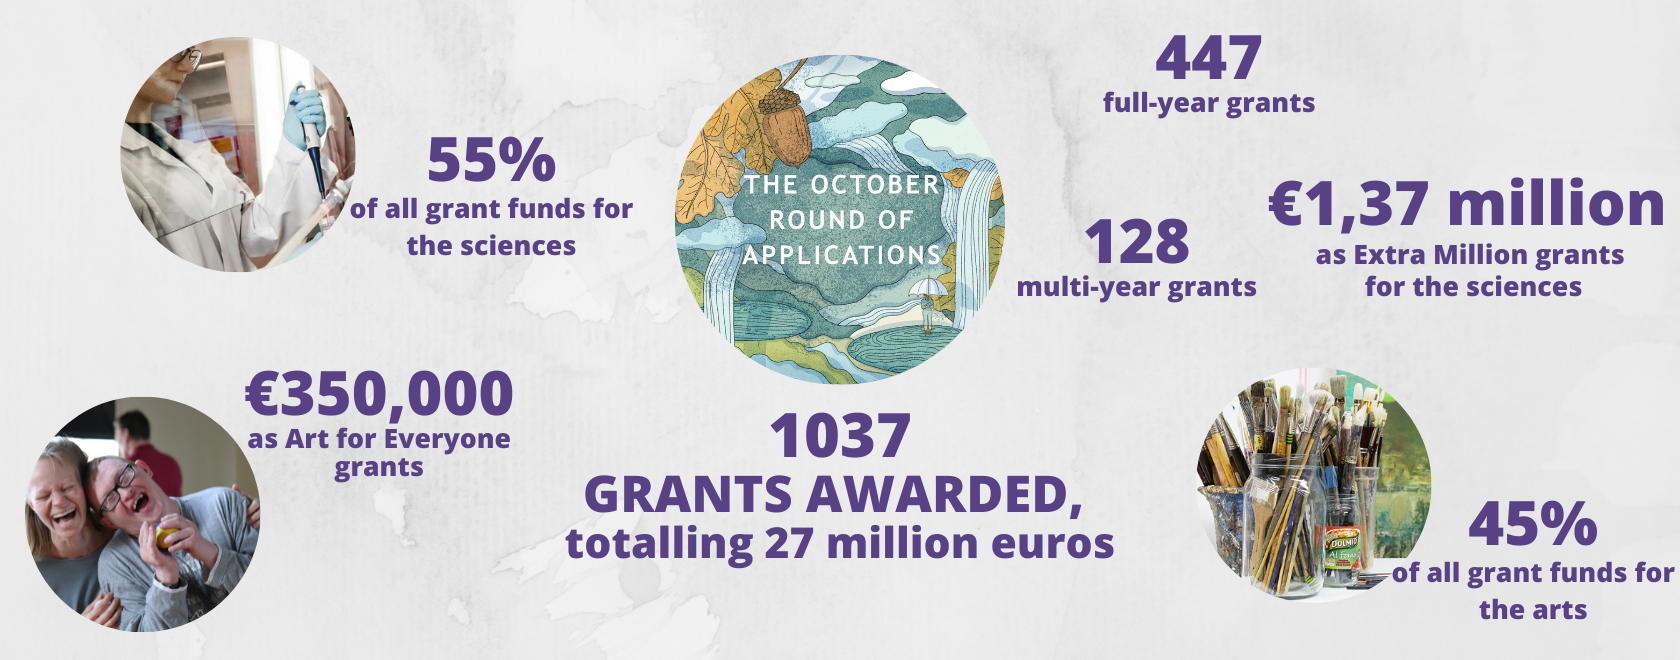 1037 grants awarded from the October round 2022